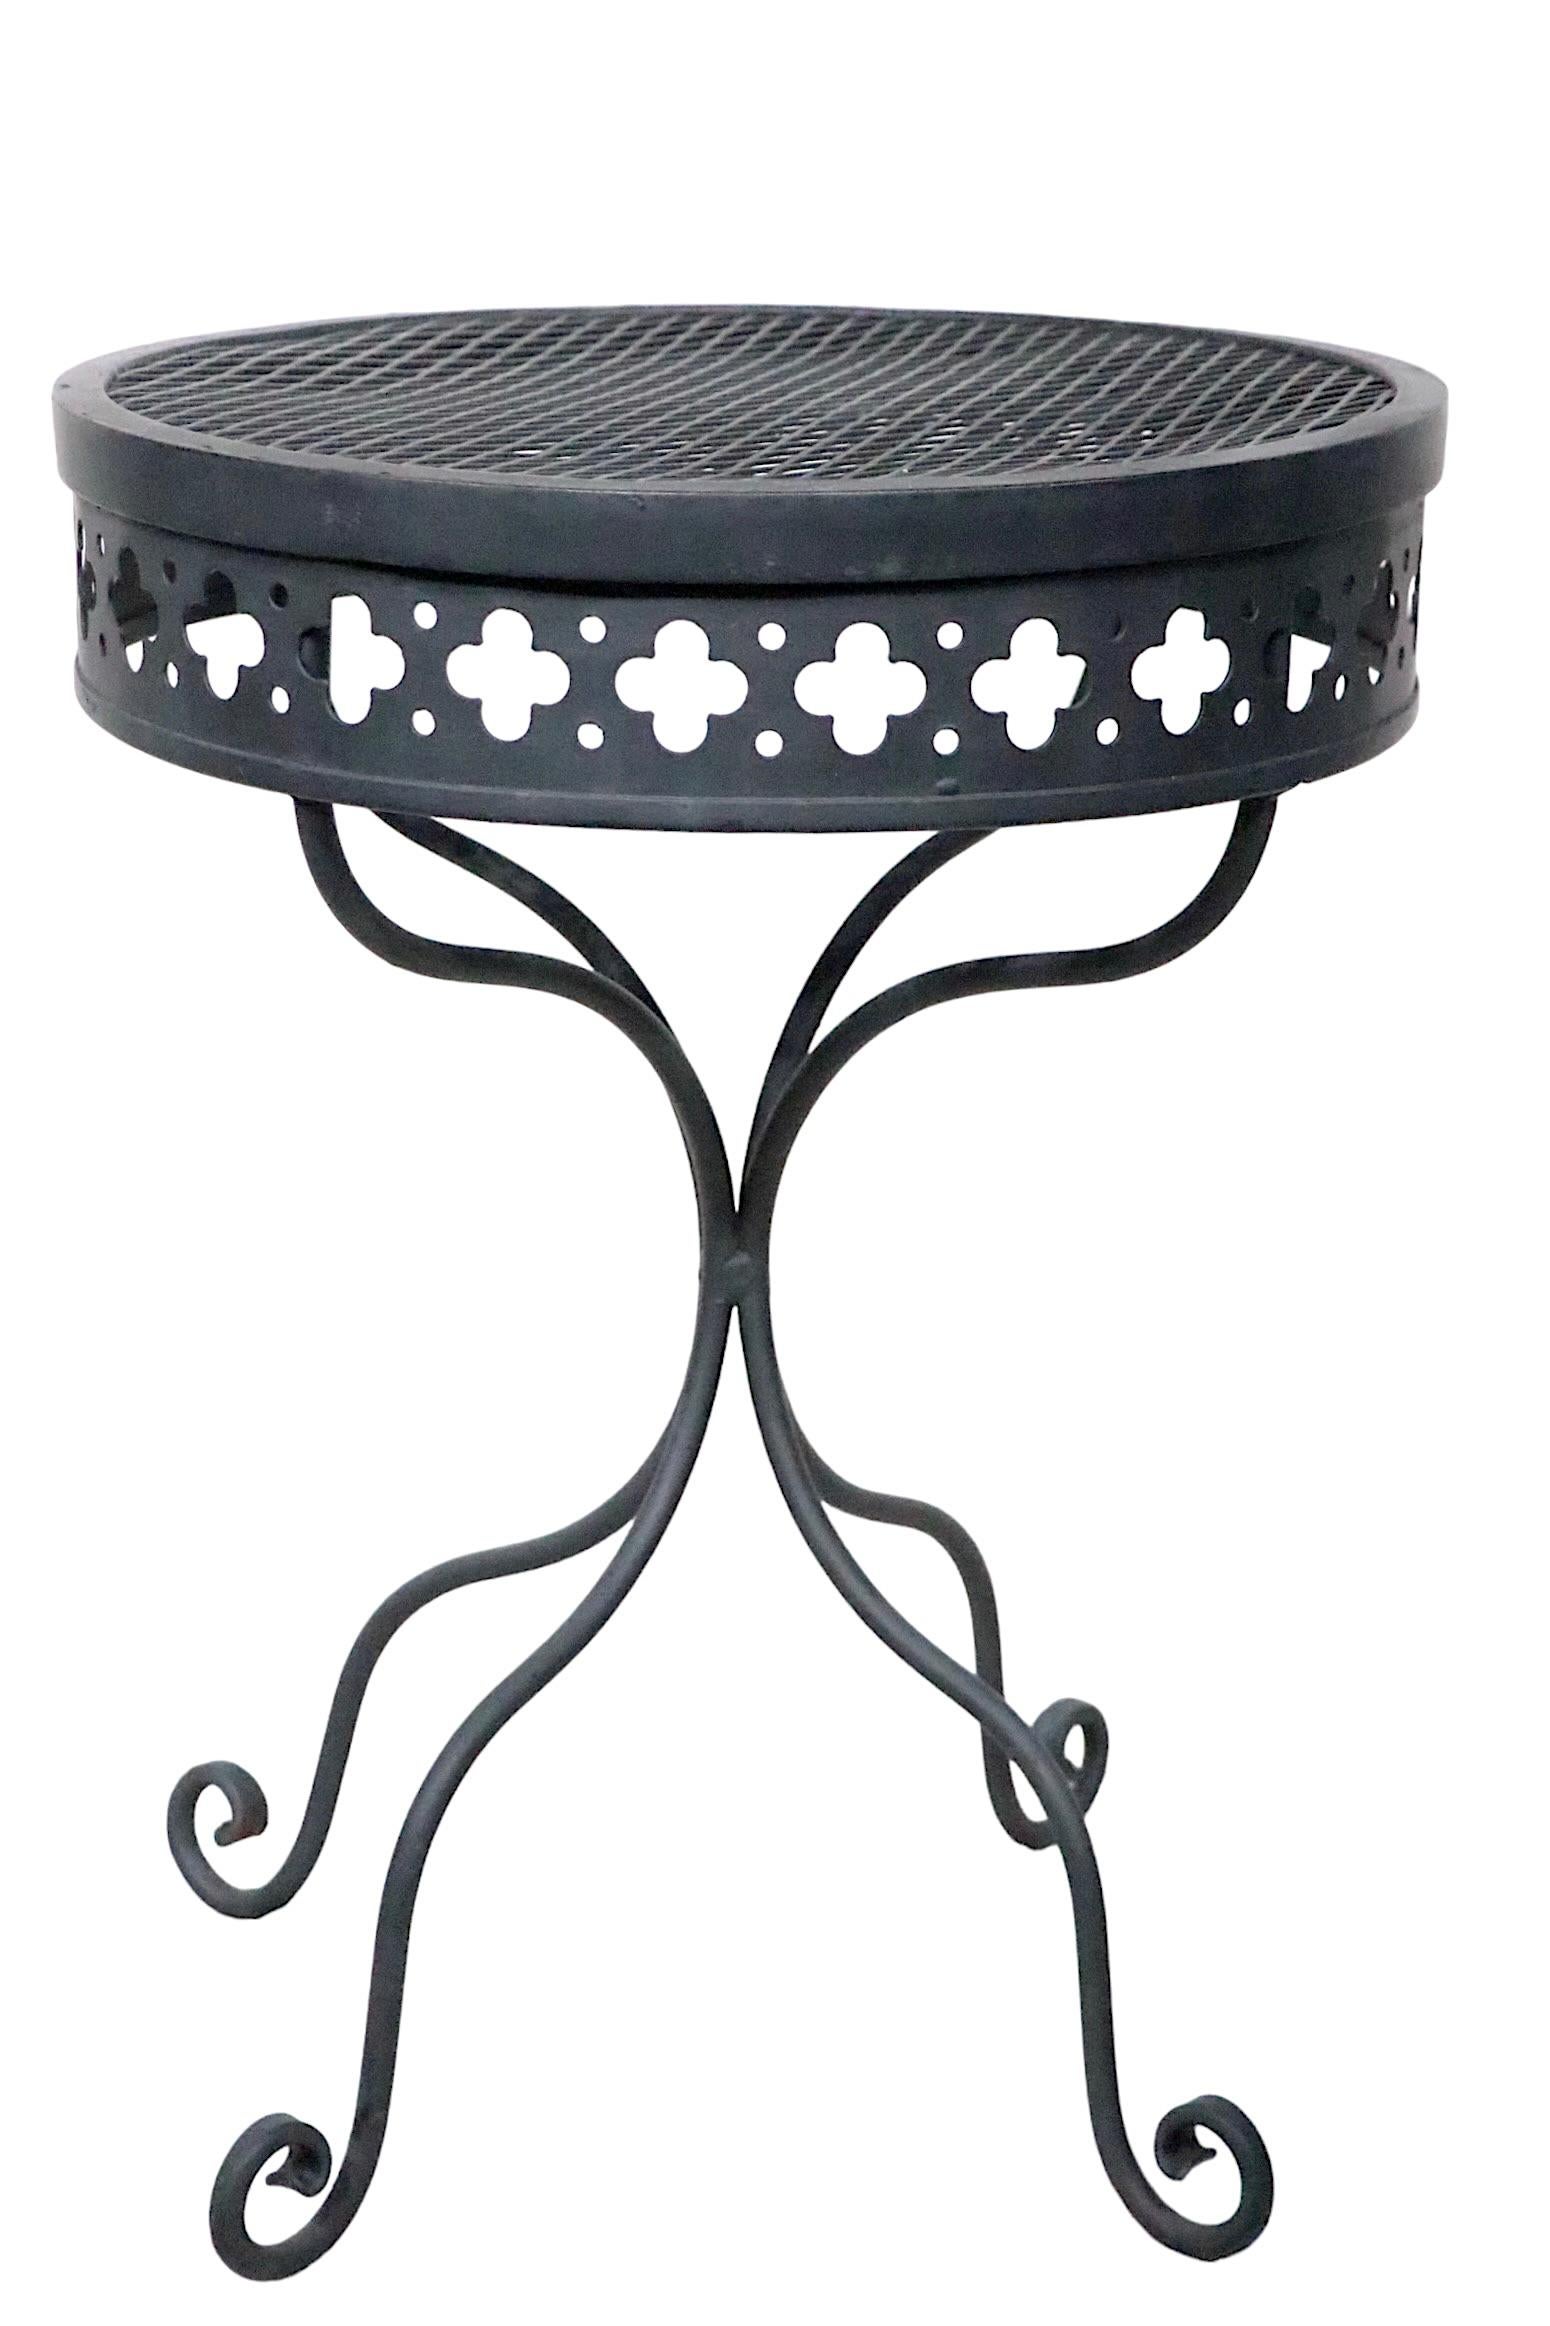 Wrought Iron and Metal Mesh Garden Patio Side End Table Taj Mahal by Salterini For Sale 1